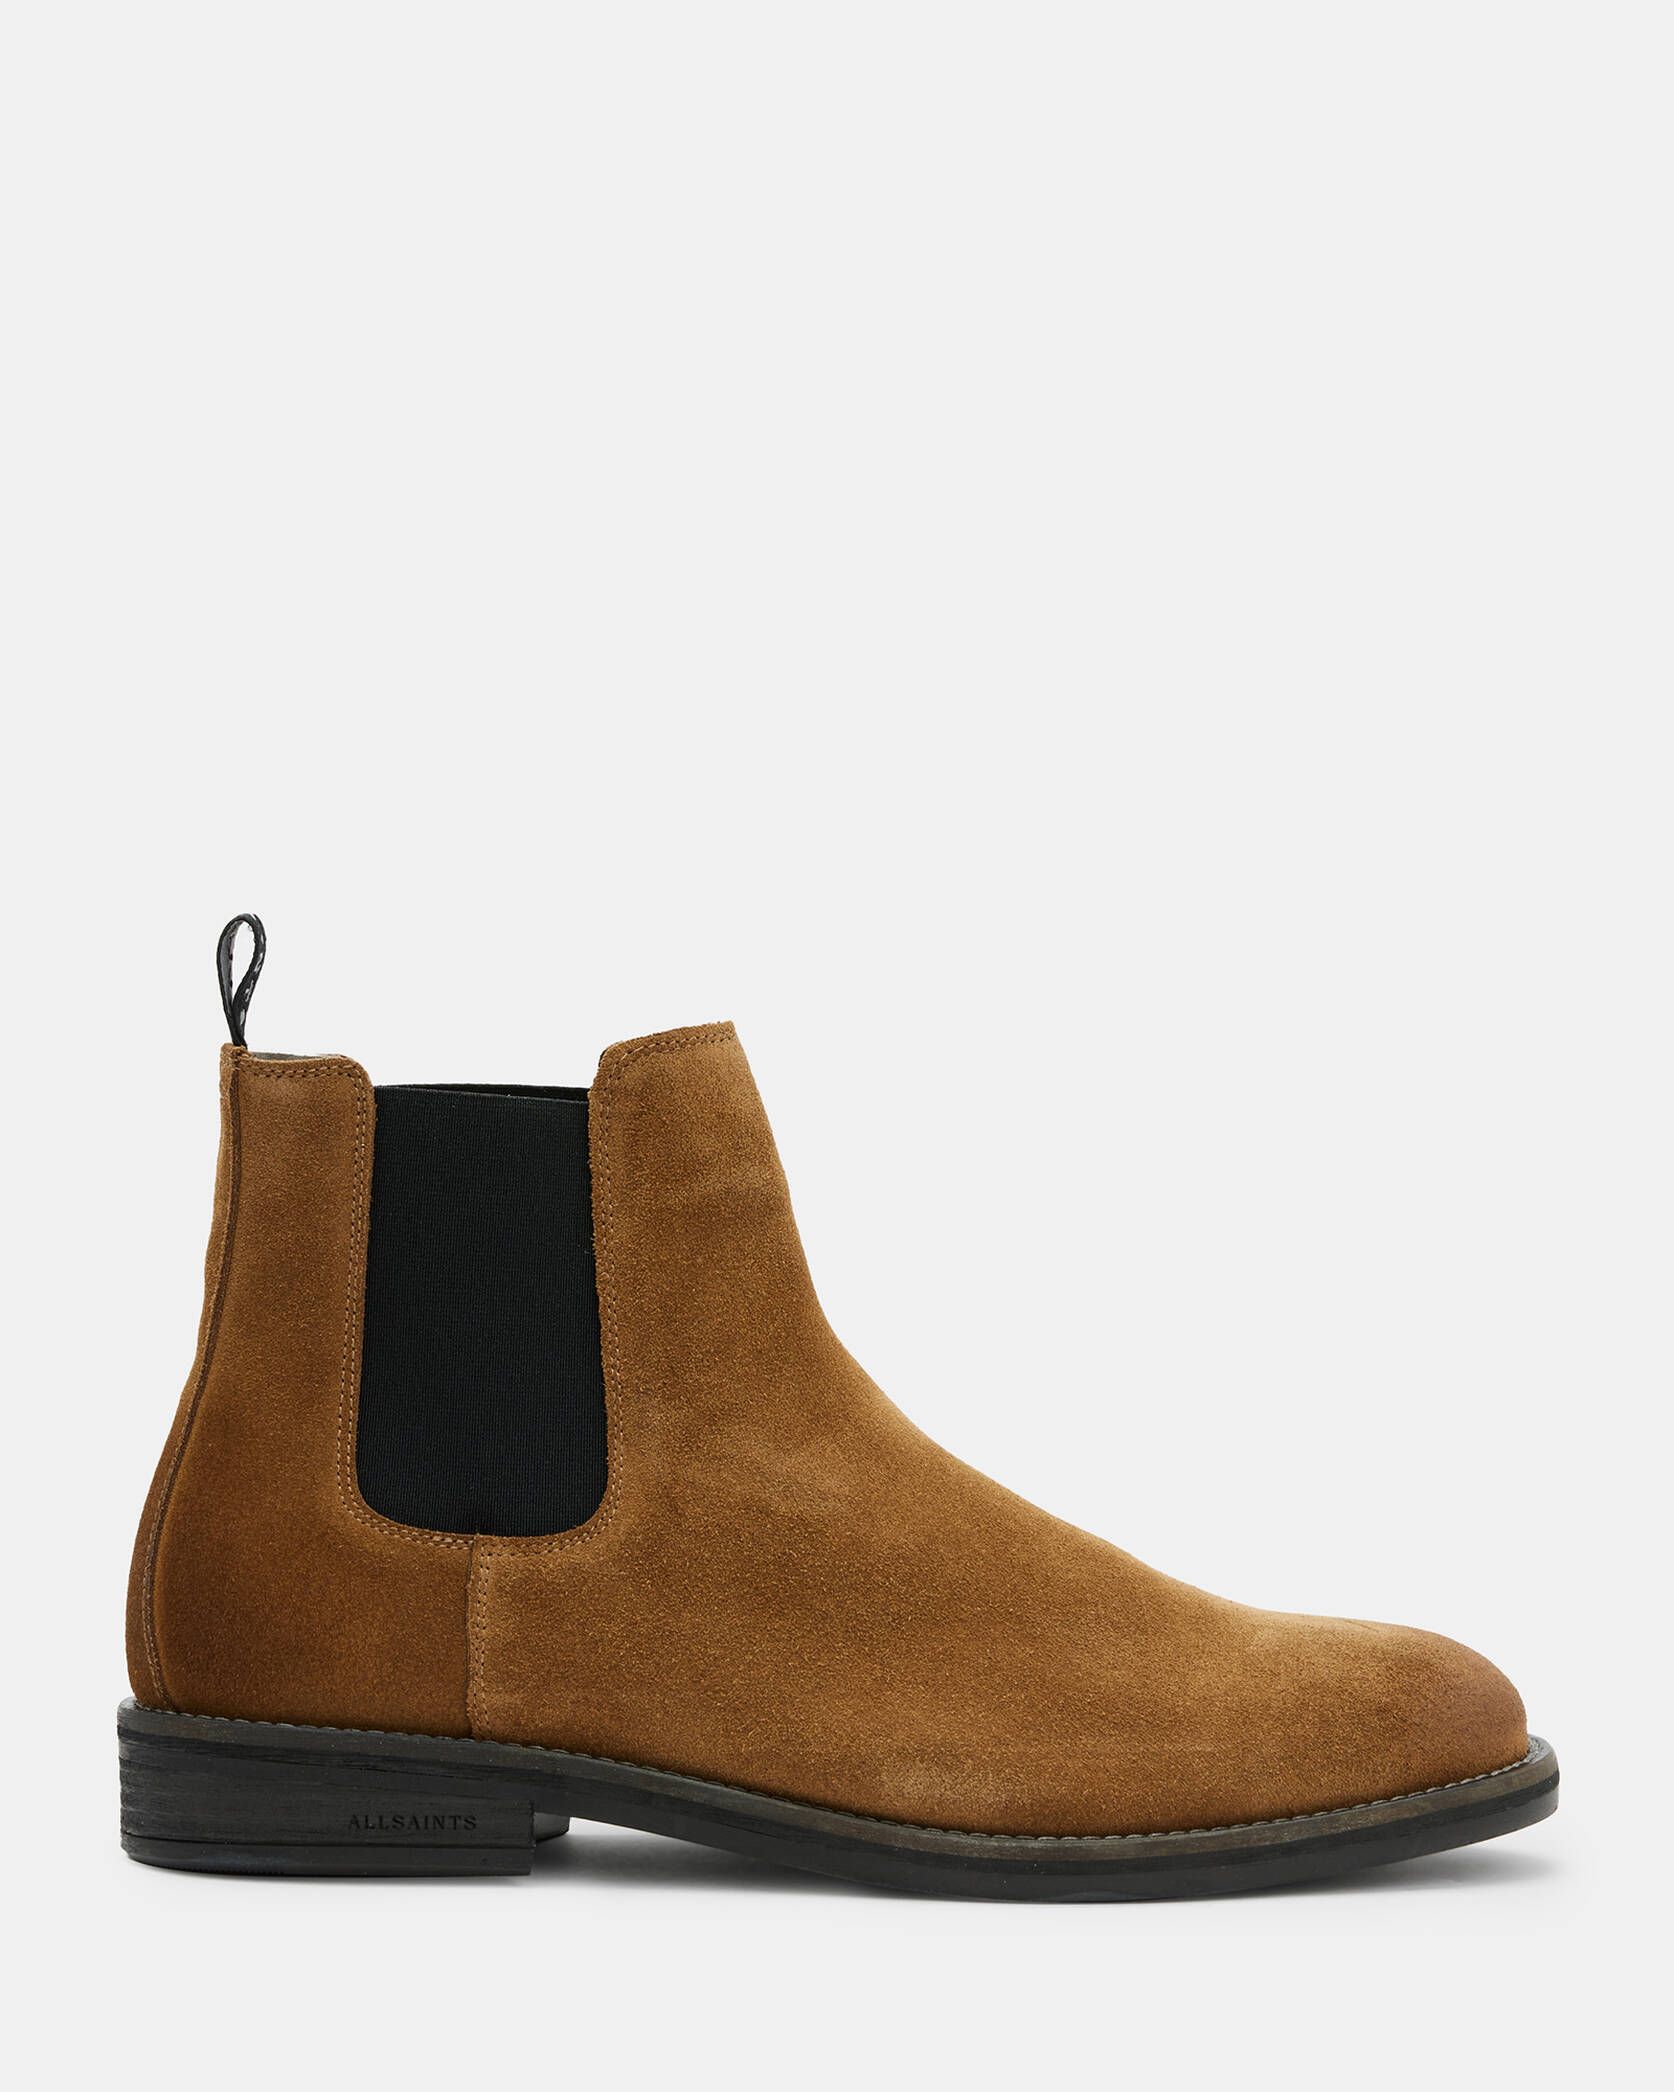 Harley Leather Chelsea Boots Tobacco Gold | ALLSAINTS US | AllSaints US